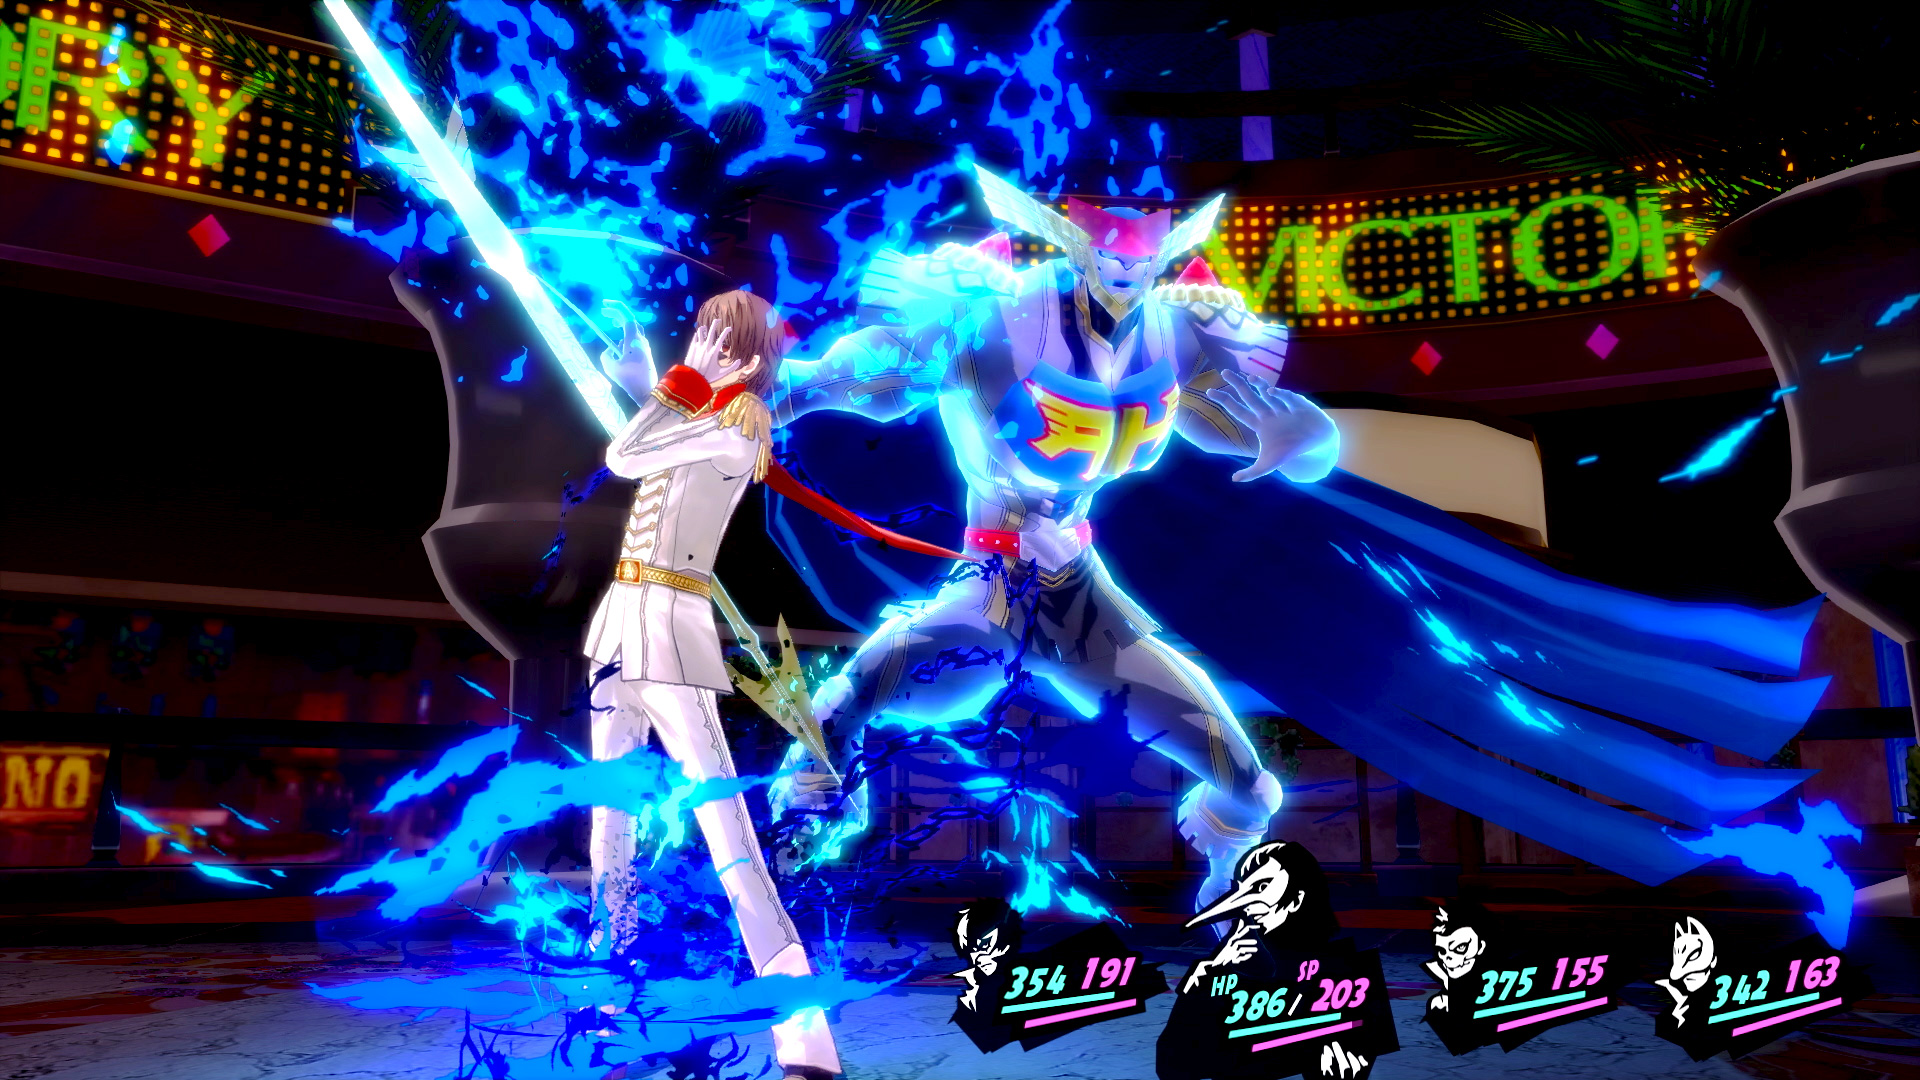 Persona 5 Boss Fight Guide: How To Defeat Persona 5 Royal Battles